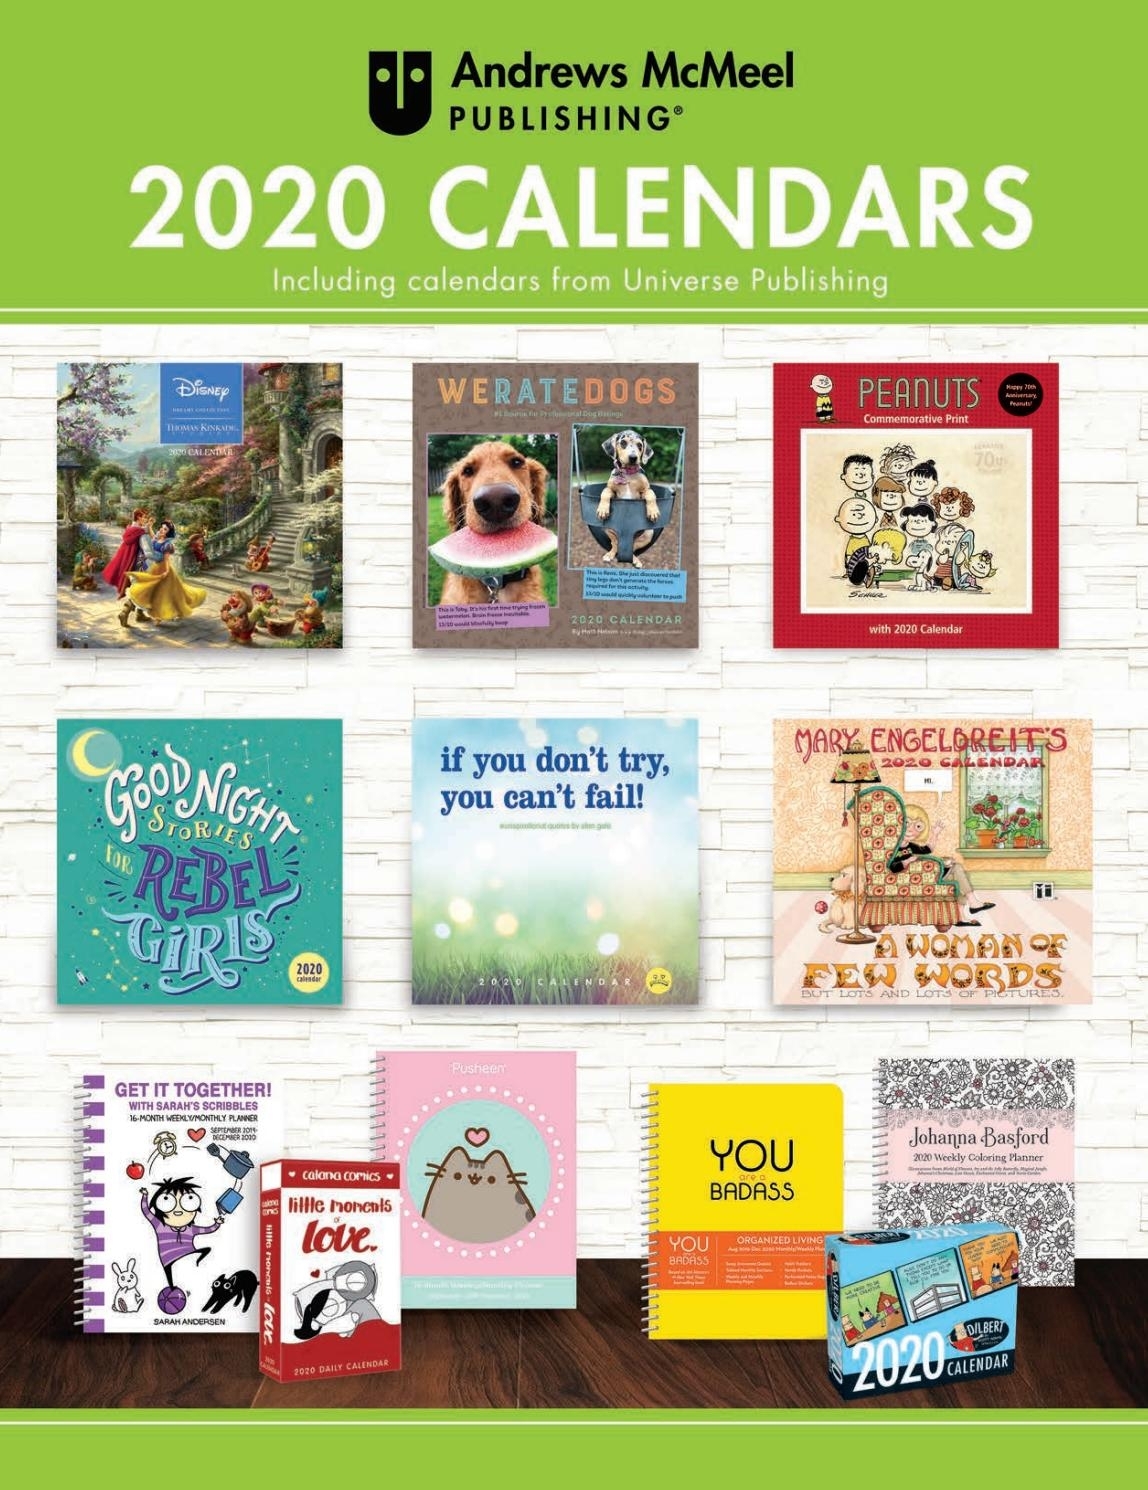 Andrews Mcmeel Publishing 2020 Calendar Catalogandrews intended for Ander Of Special Days Of 2020